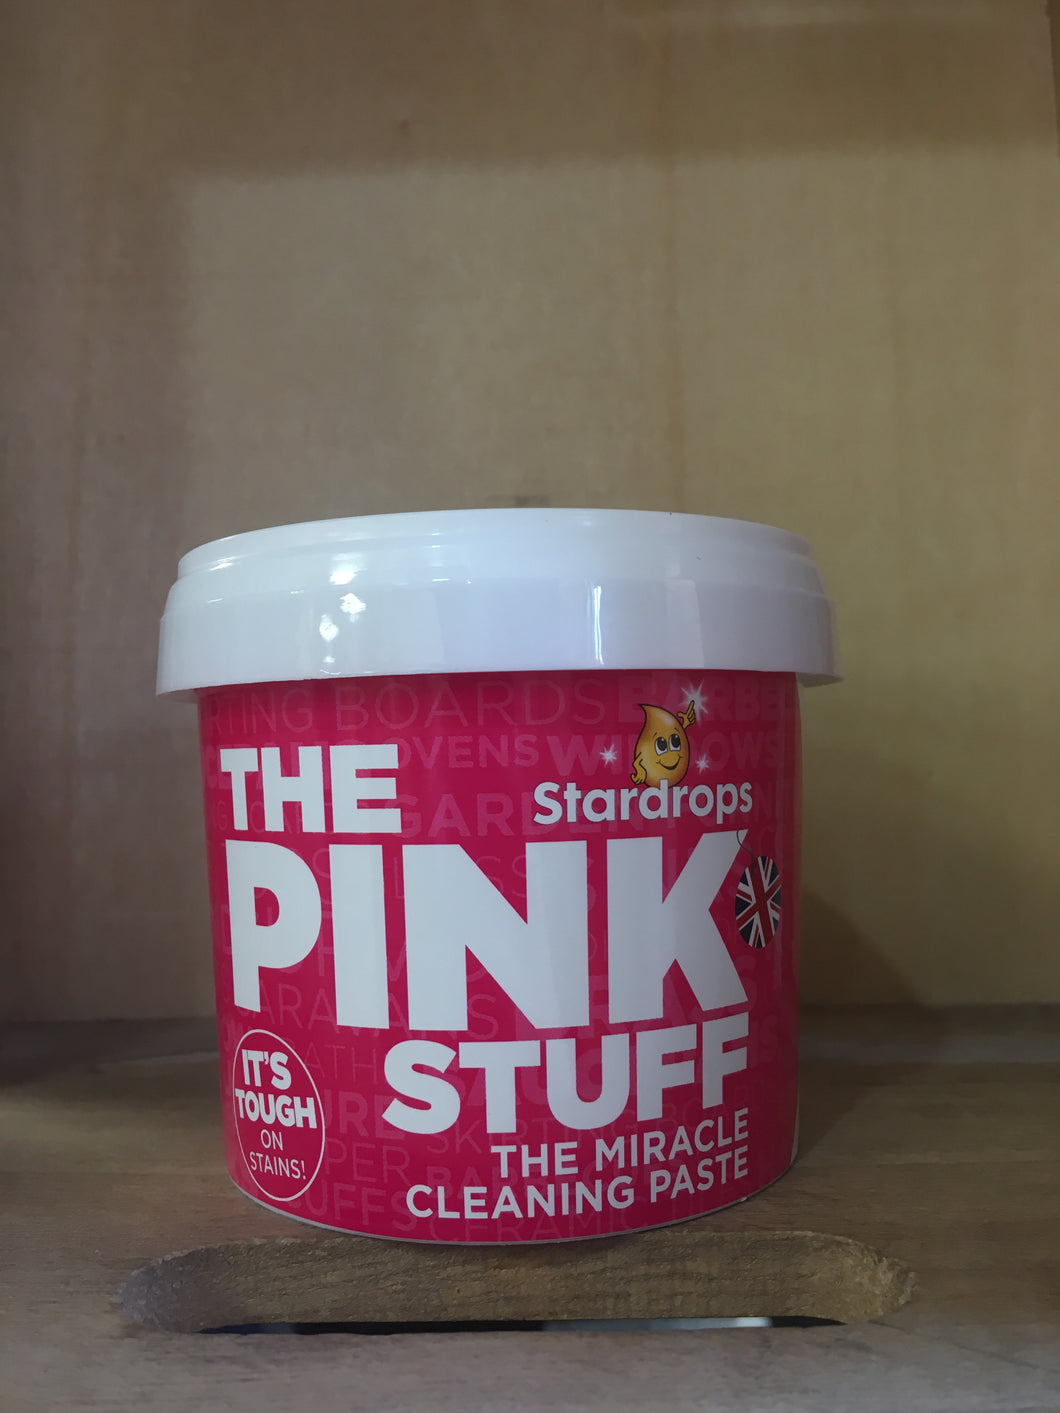 Have a question about THE PINK STUFF 500g Miracle Cleaning Paste